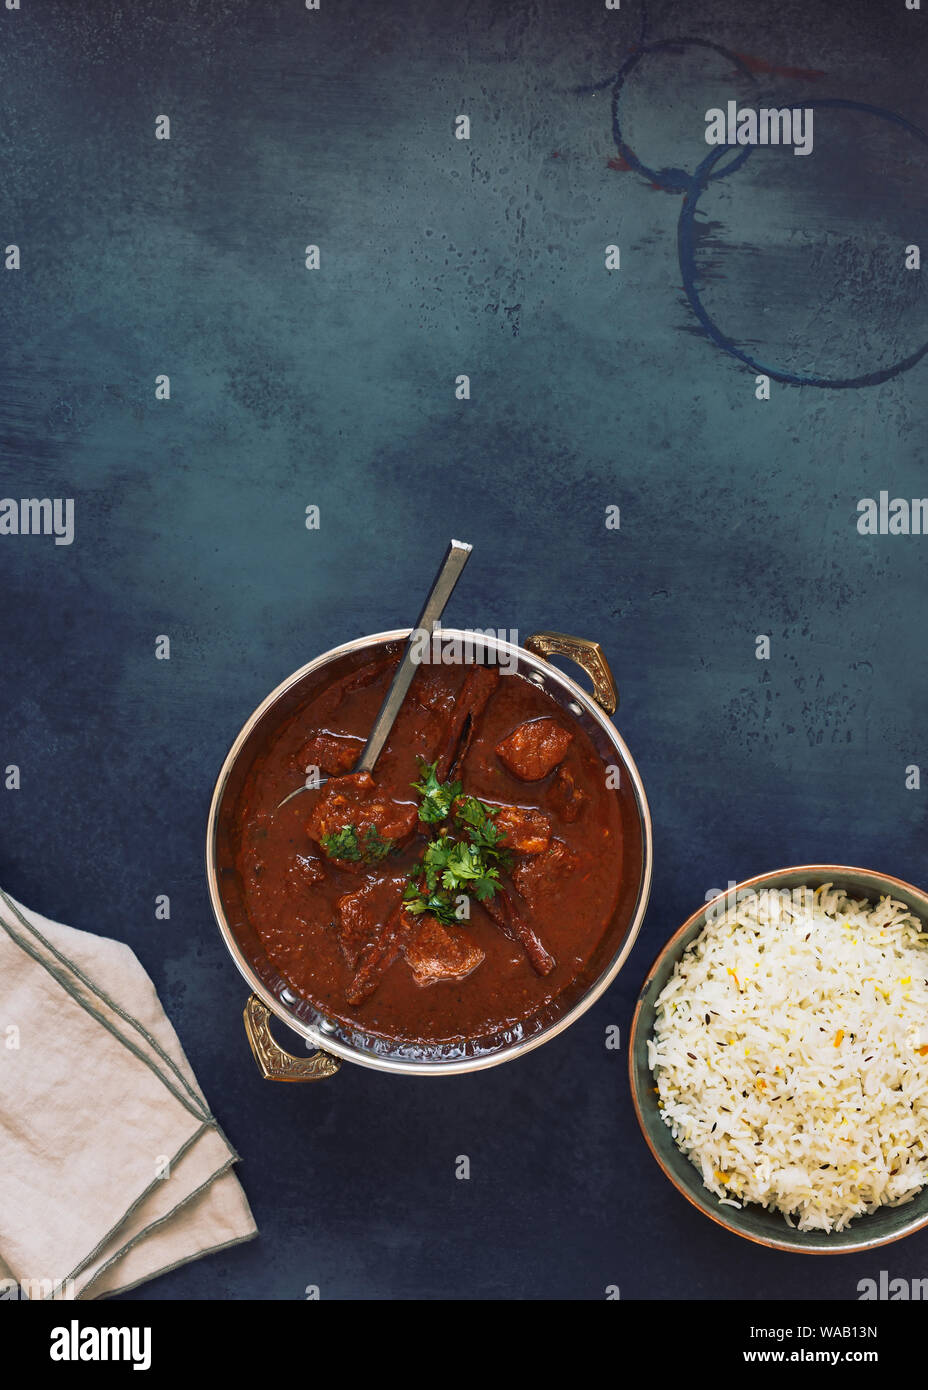 Rogan Josh lamb curry, authentic kashmiri lamb meat curry, served with pulao rice and garnished with coriander, top view Stock Photo